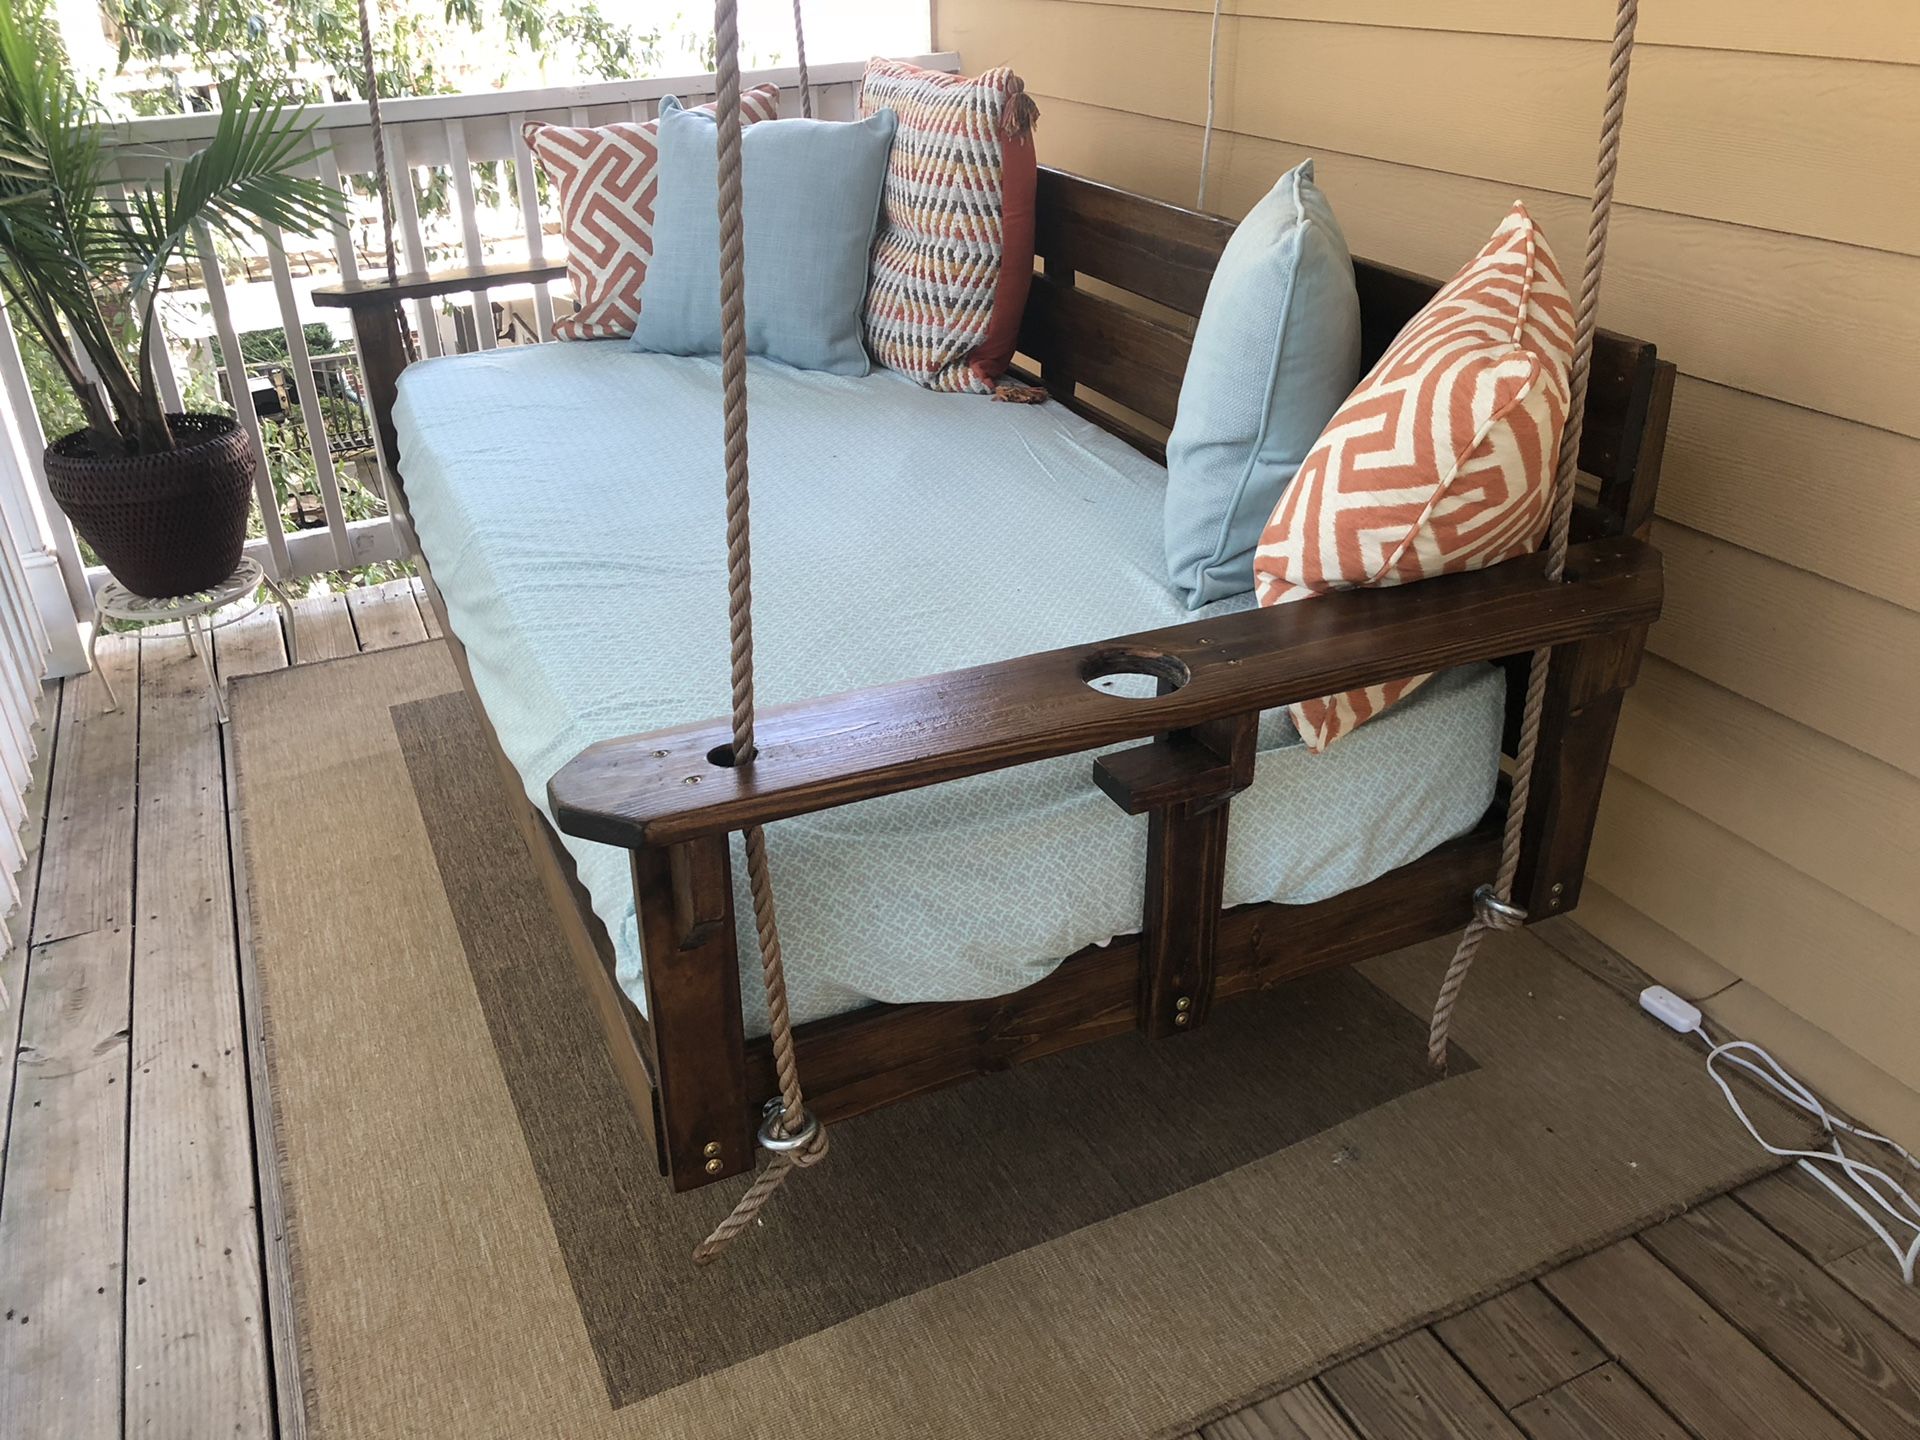 Twin Size Porch Swing/Day Bed